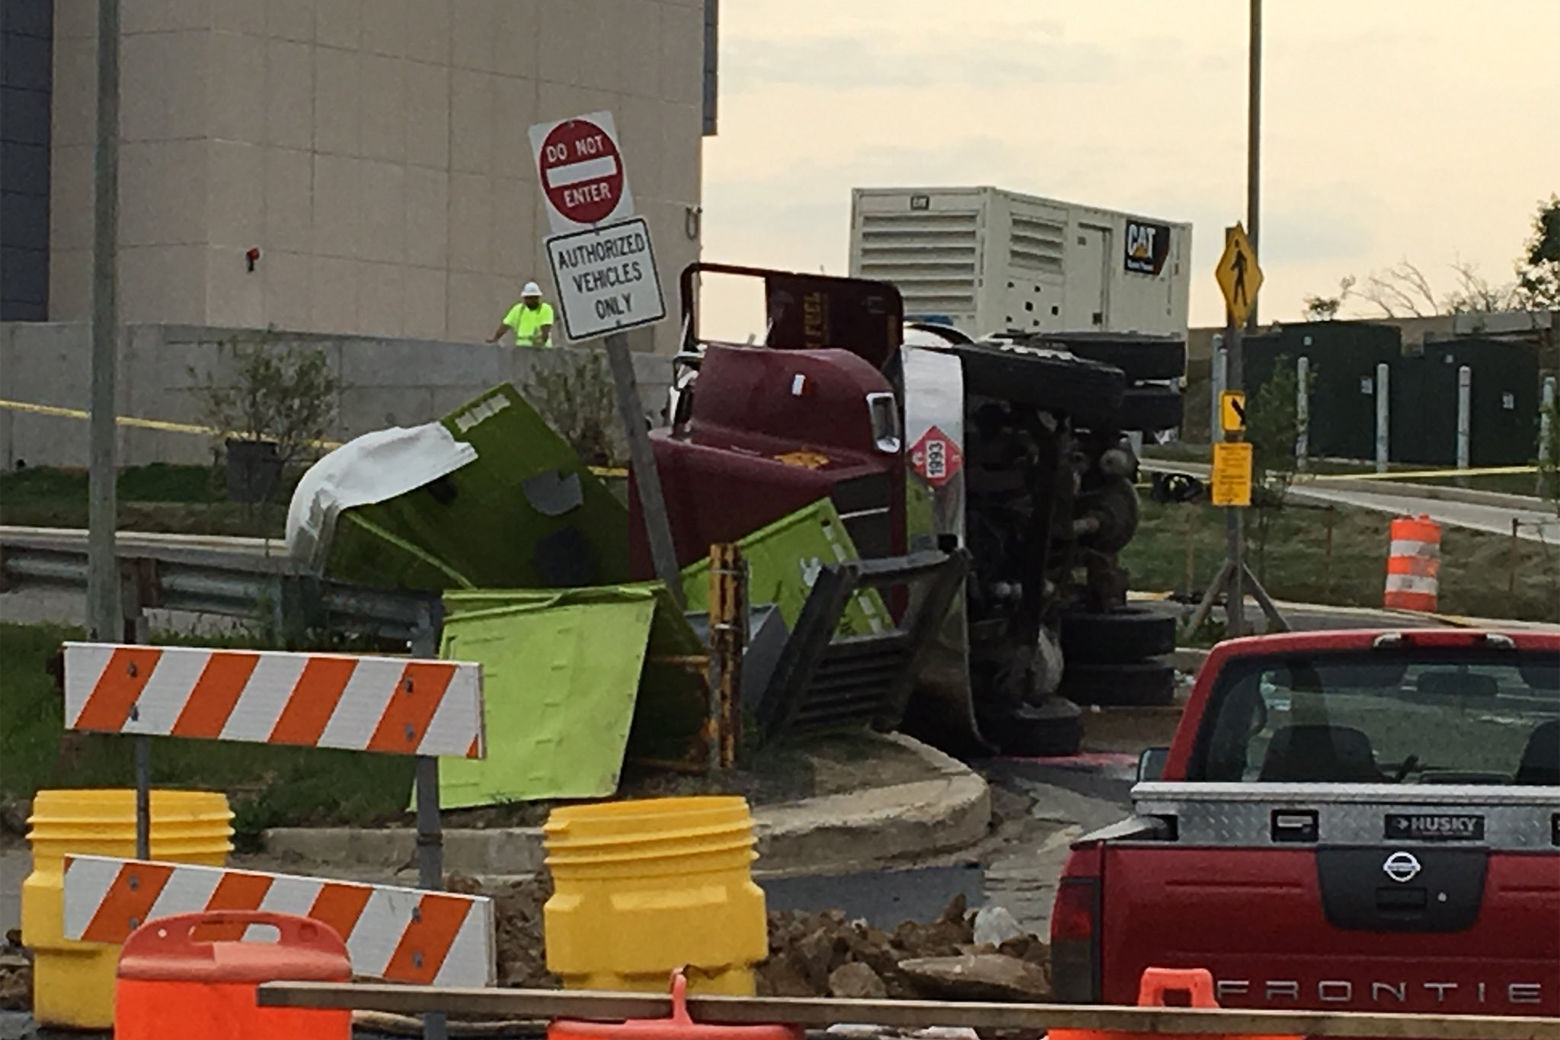 A tanker truck carrying 1700 gallons of diesel fuel overturned on South Capitol Street in Southeast D.C. during the Friday morning commute, spilling fuel into the roadway. (Courtesy D.C. Fire and EMS)